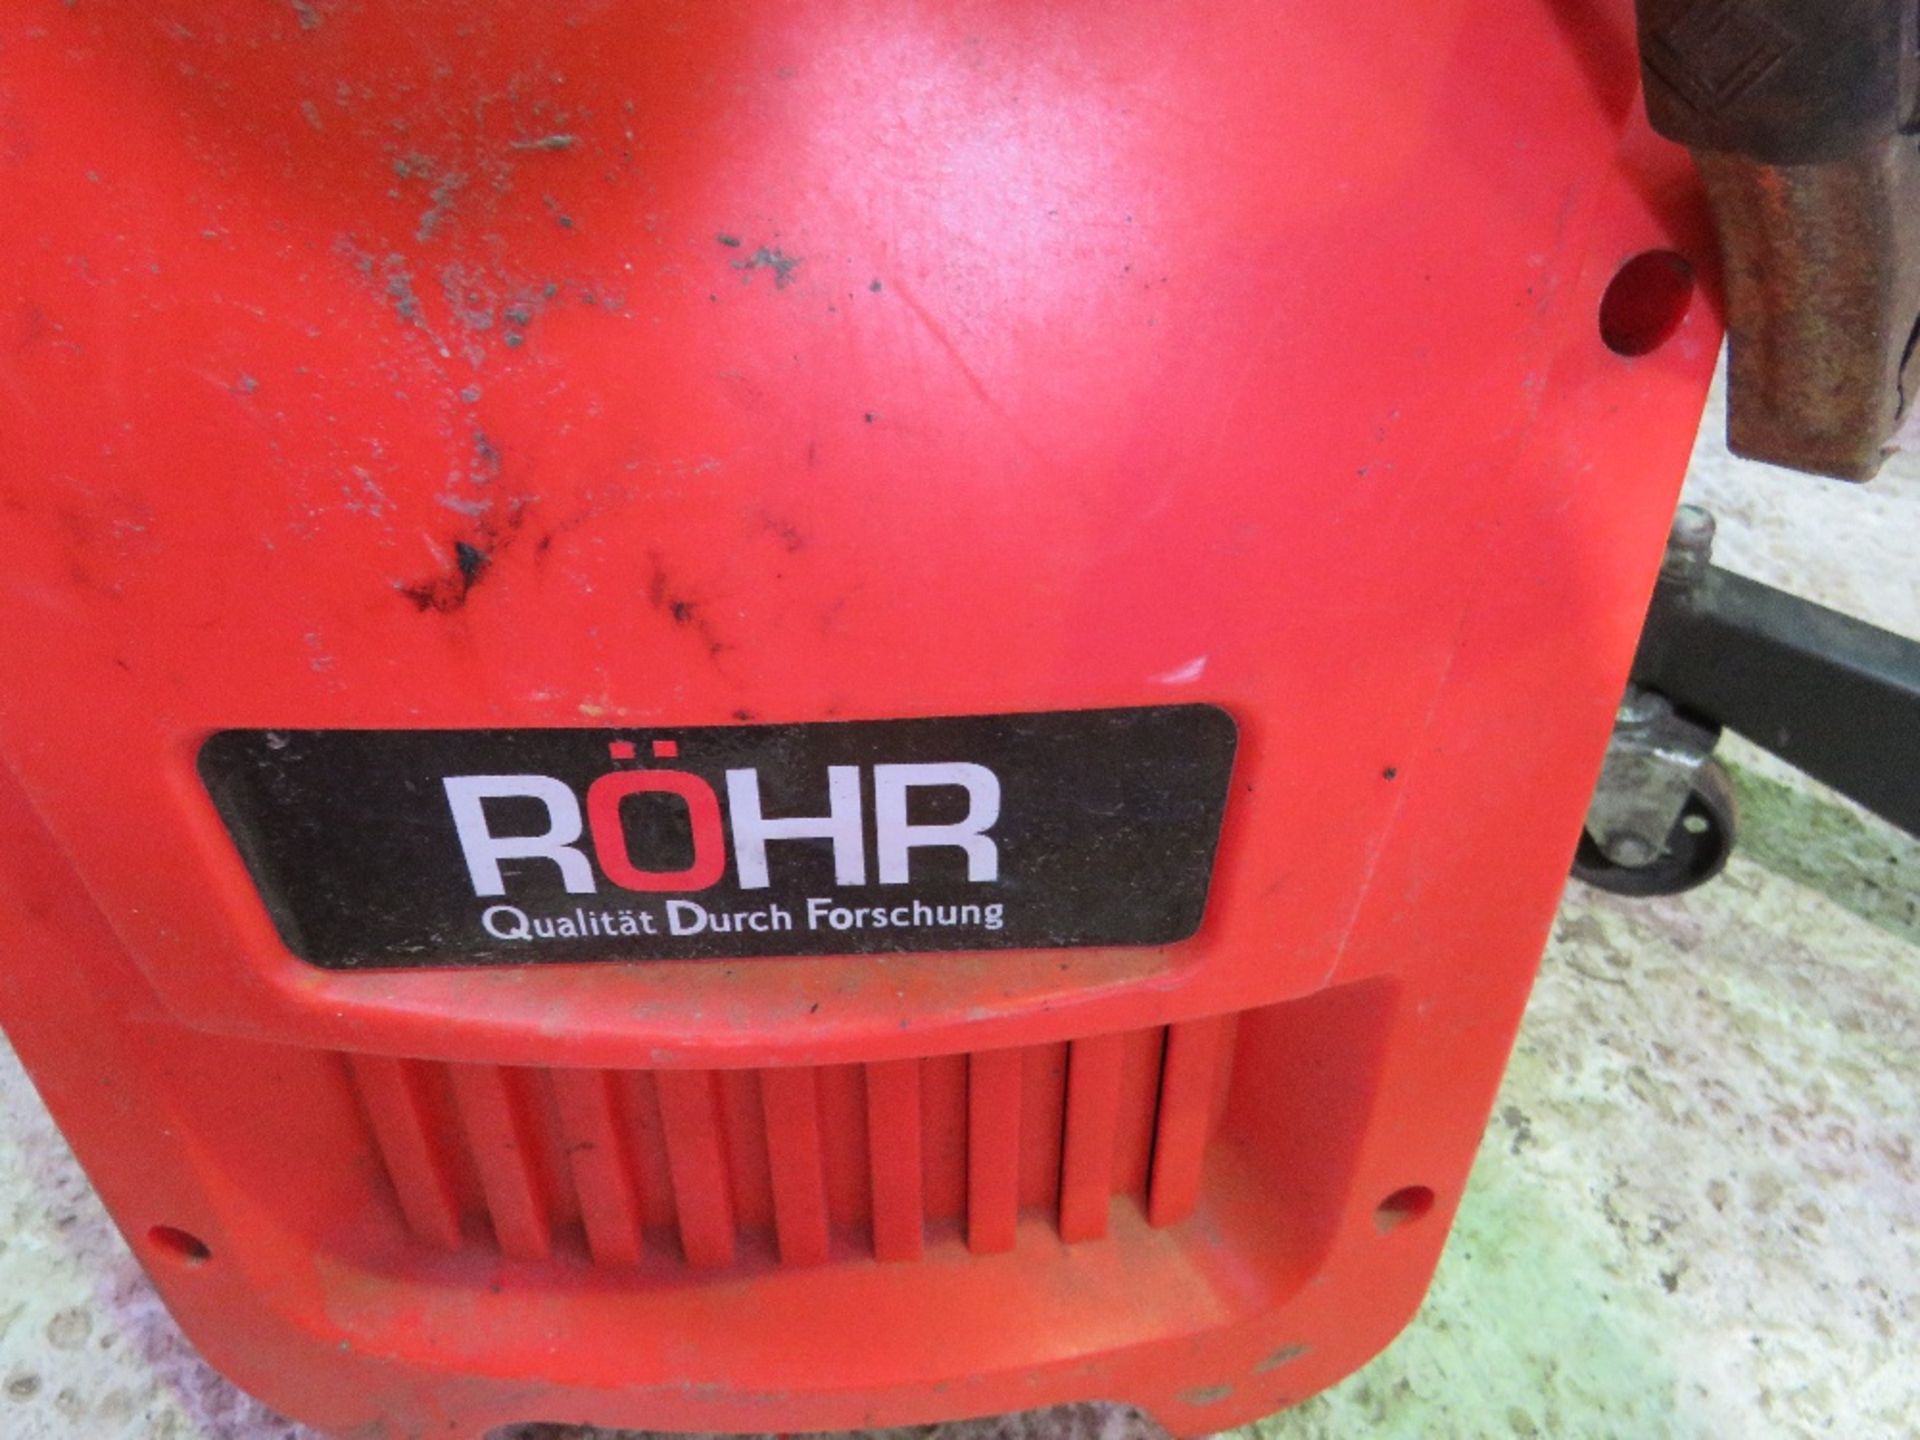 ROHR 12/24 VOLT BATTERY CHARGER PLUS A JUMP STARTER UNIT. SOURCED FROM GARAGE COMPANY LIQUIDATION. - Image 5 of 7